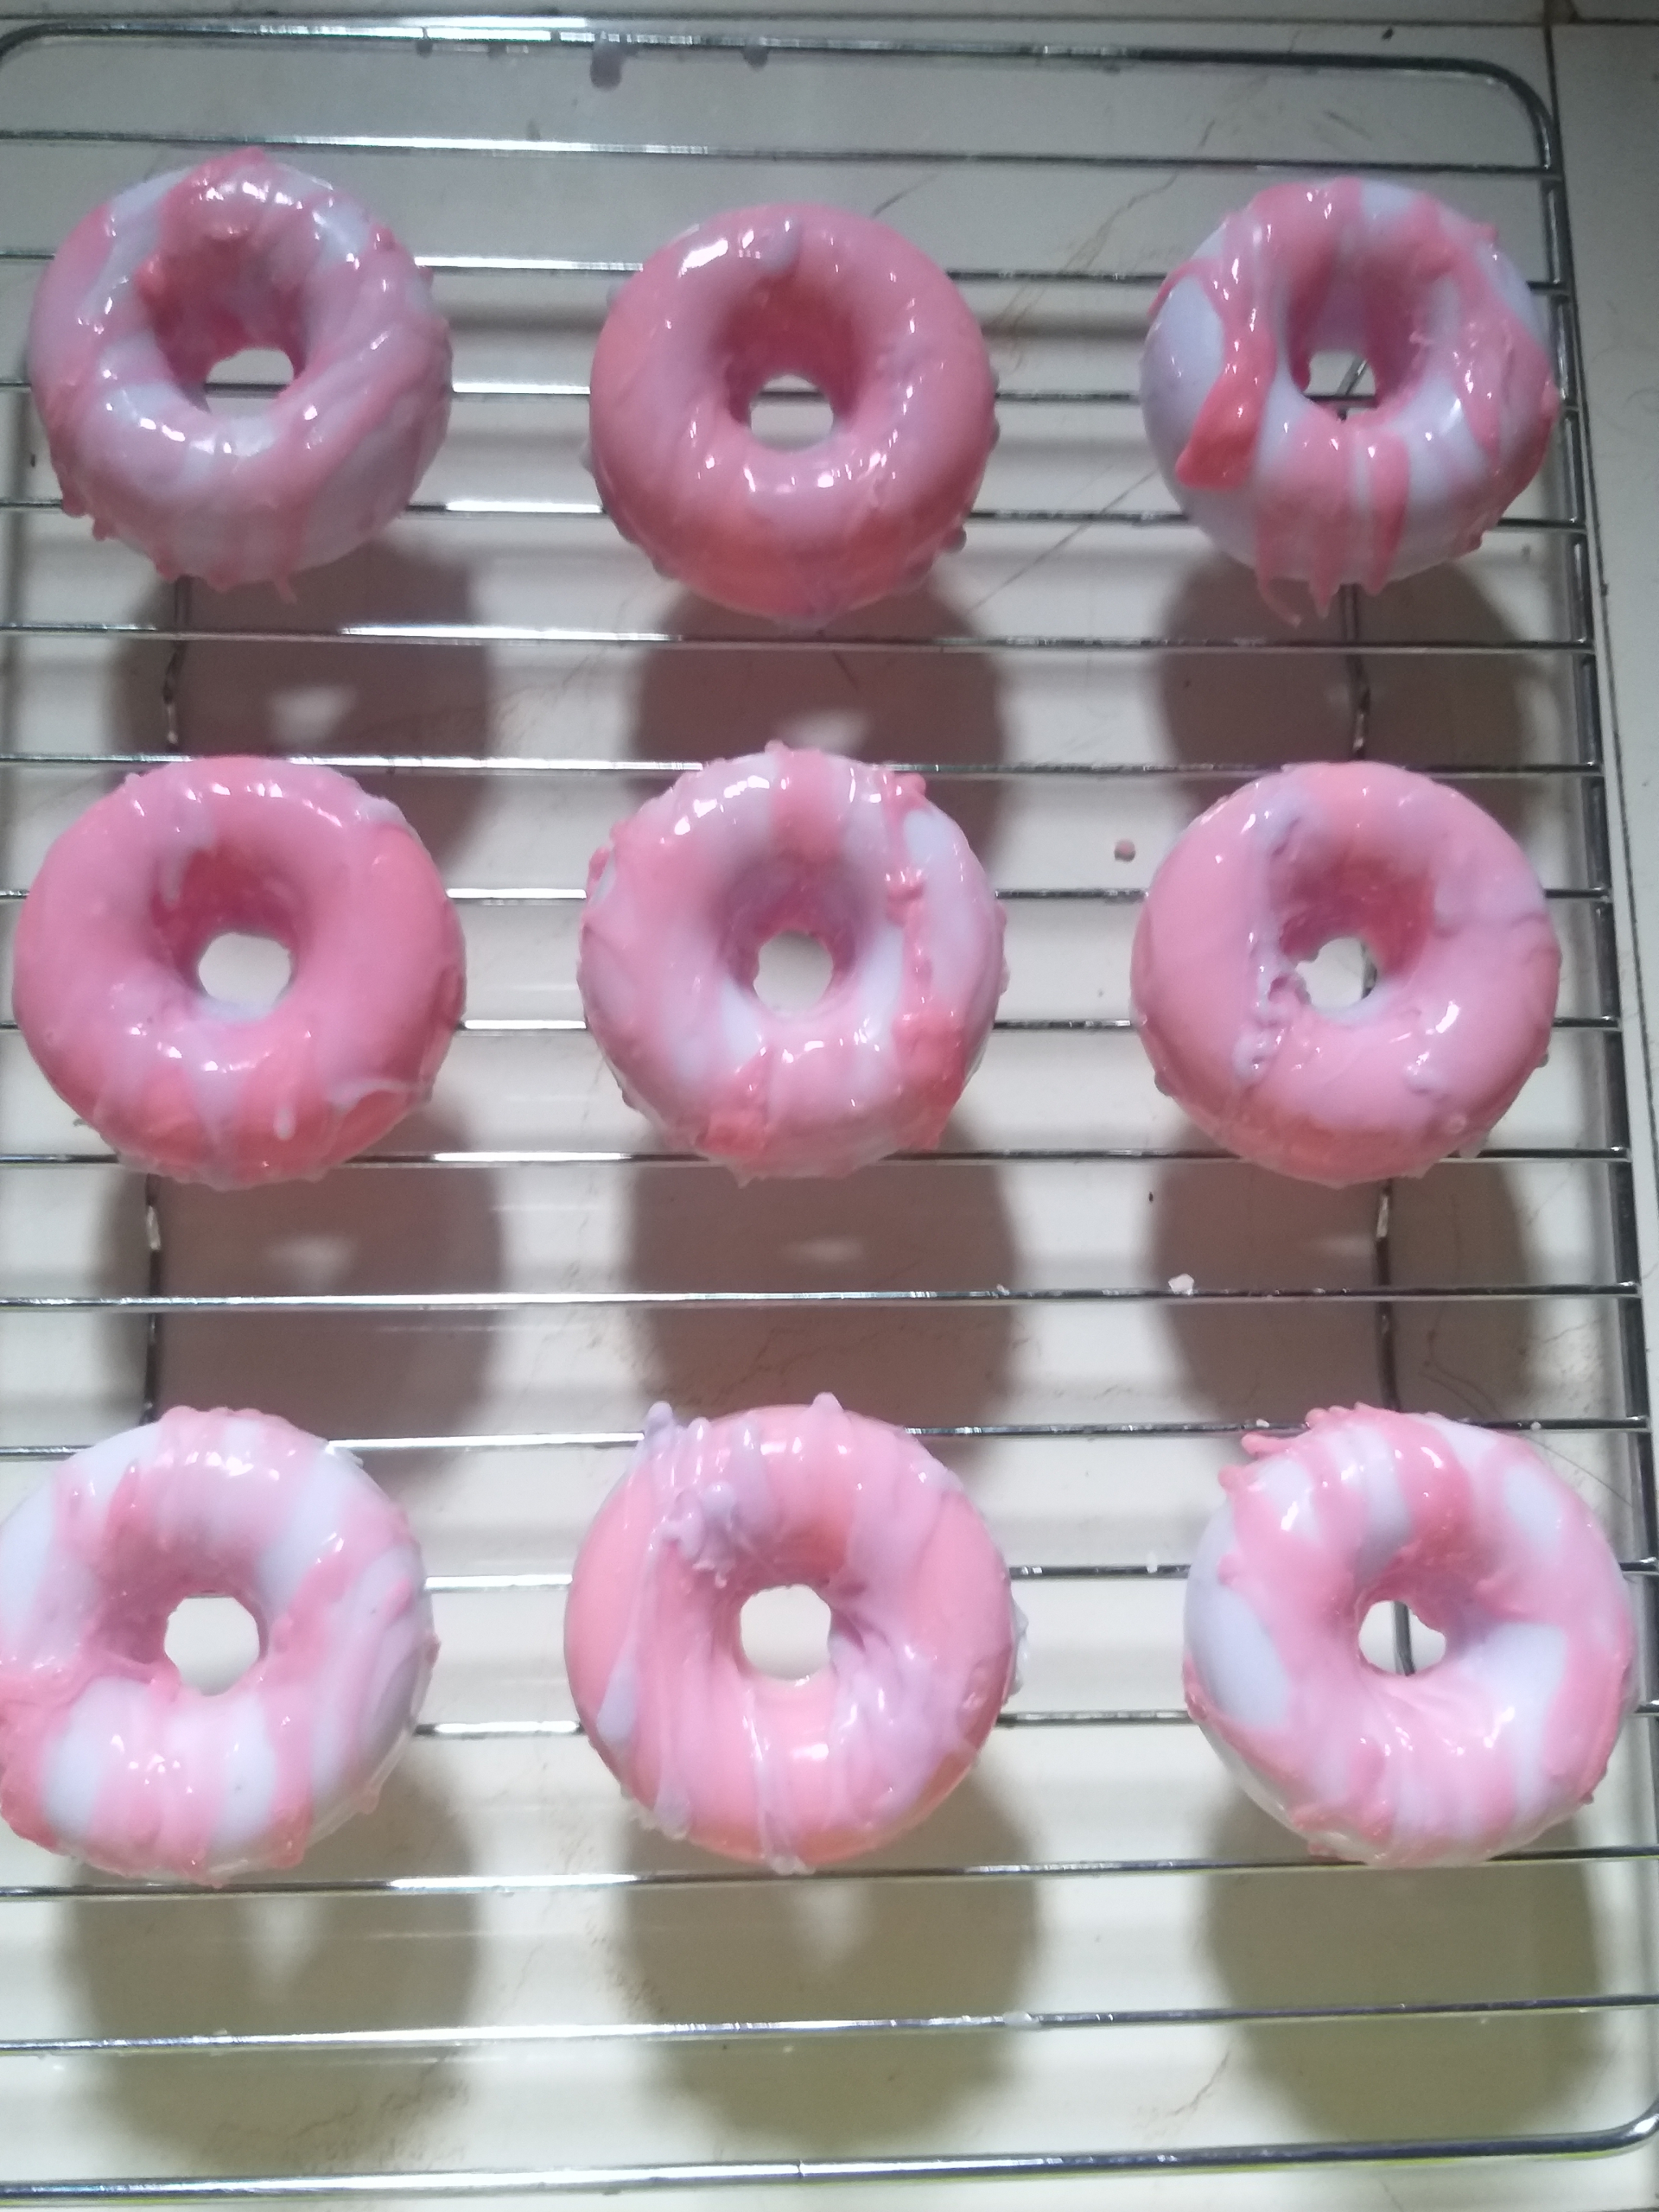 The Donut Soap